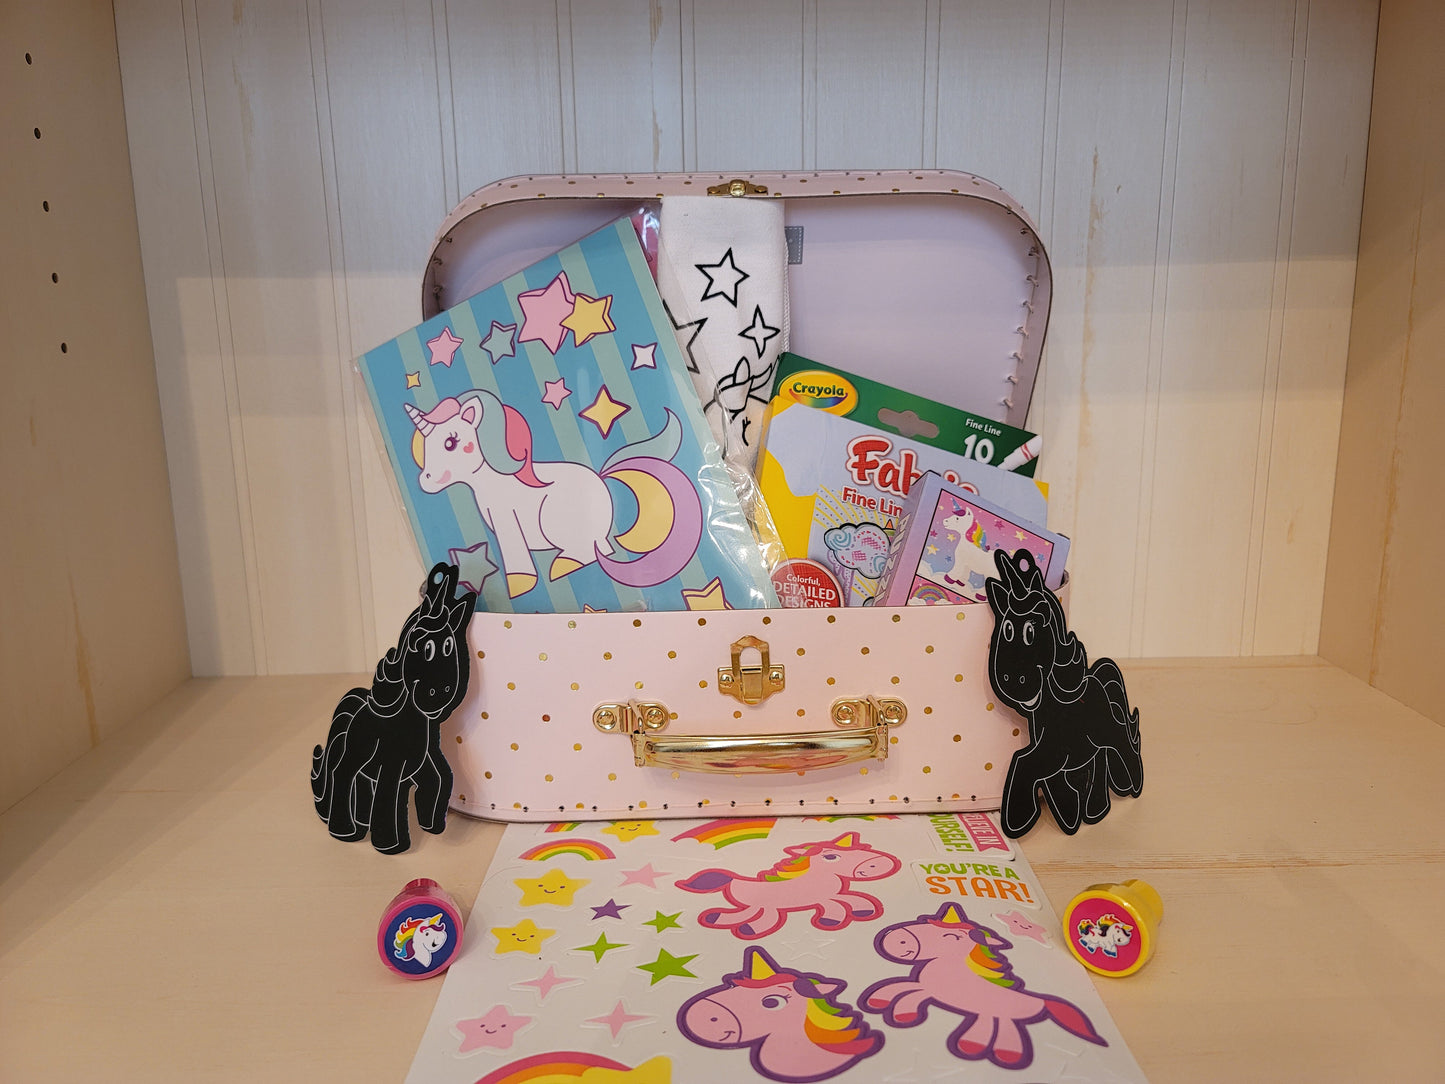 UNICORN Themed Kid Activity Set - Arts & Crafts, Games, and Activities for recommended ages 3 - 10 with reusable gift box